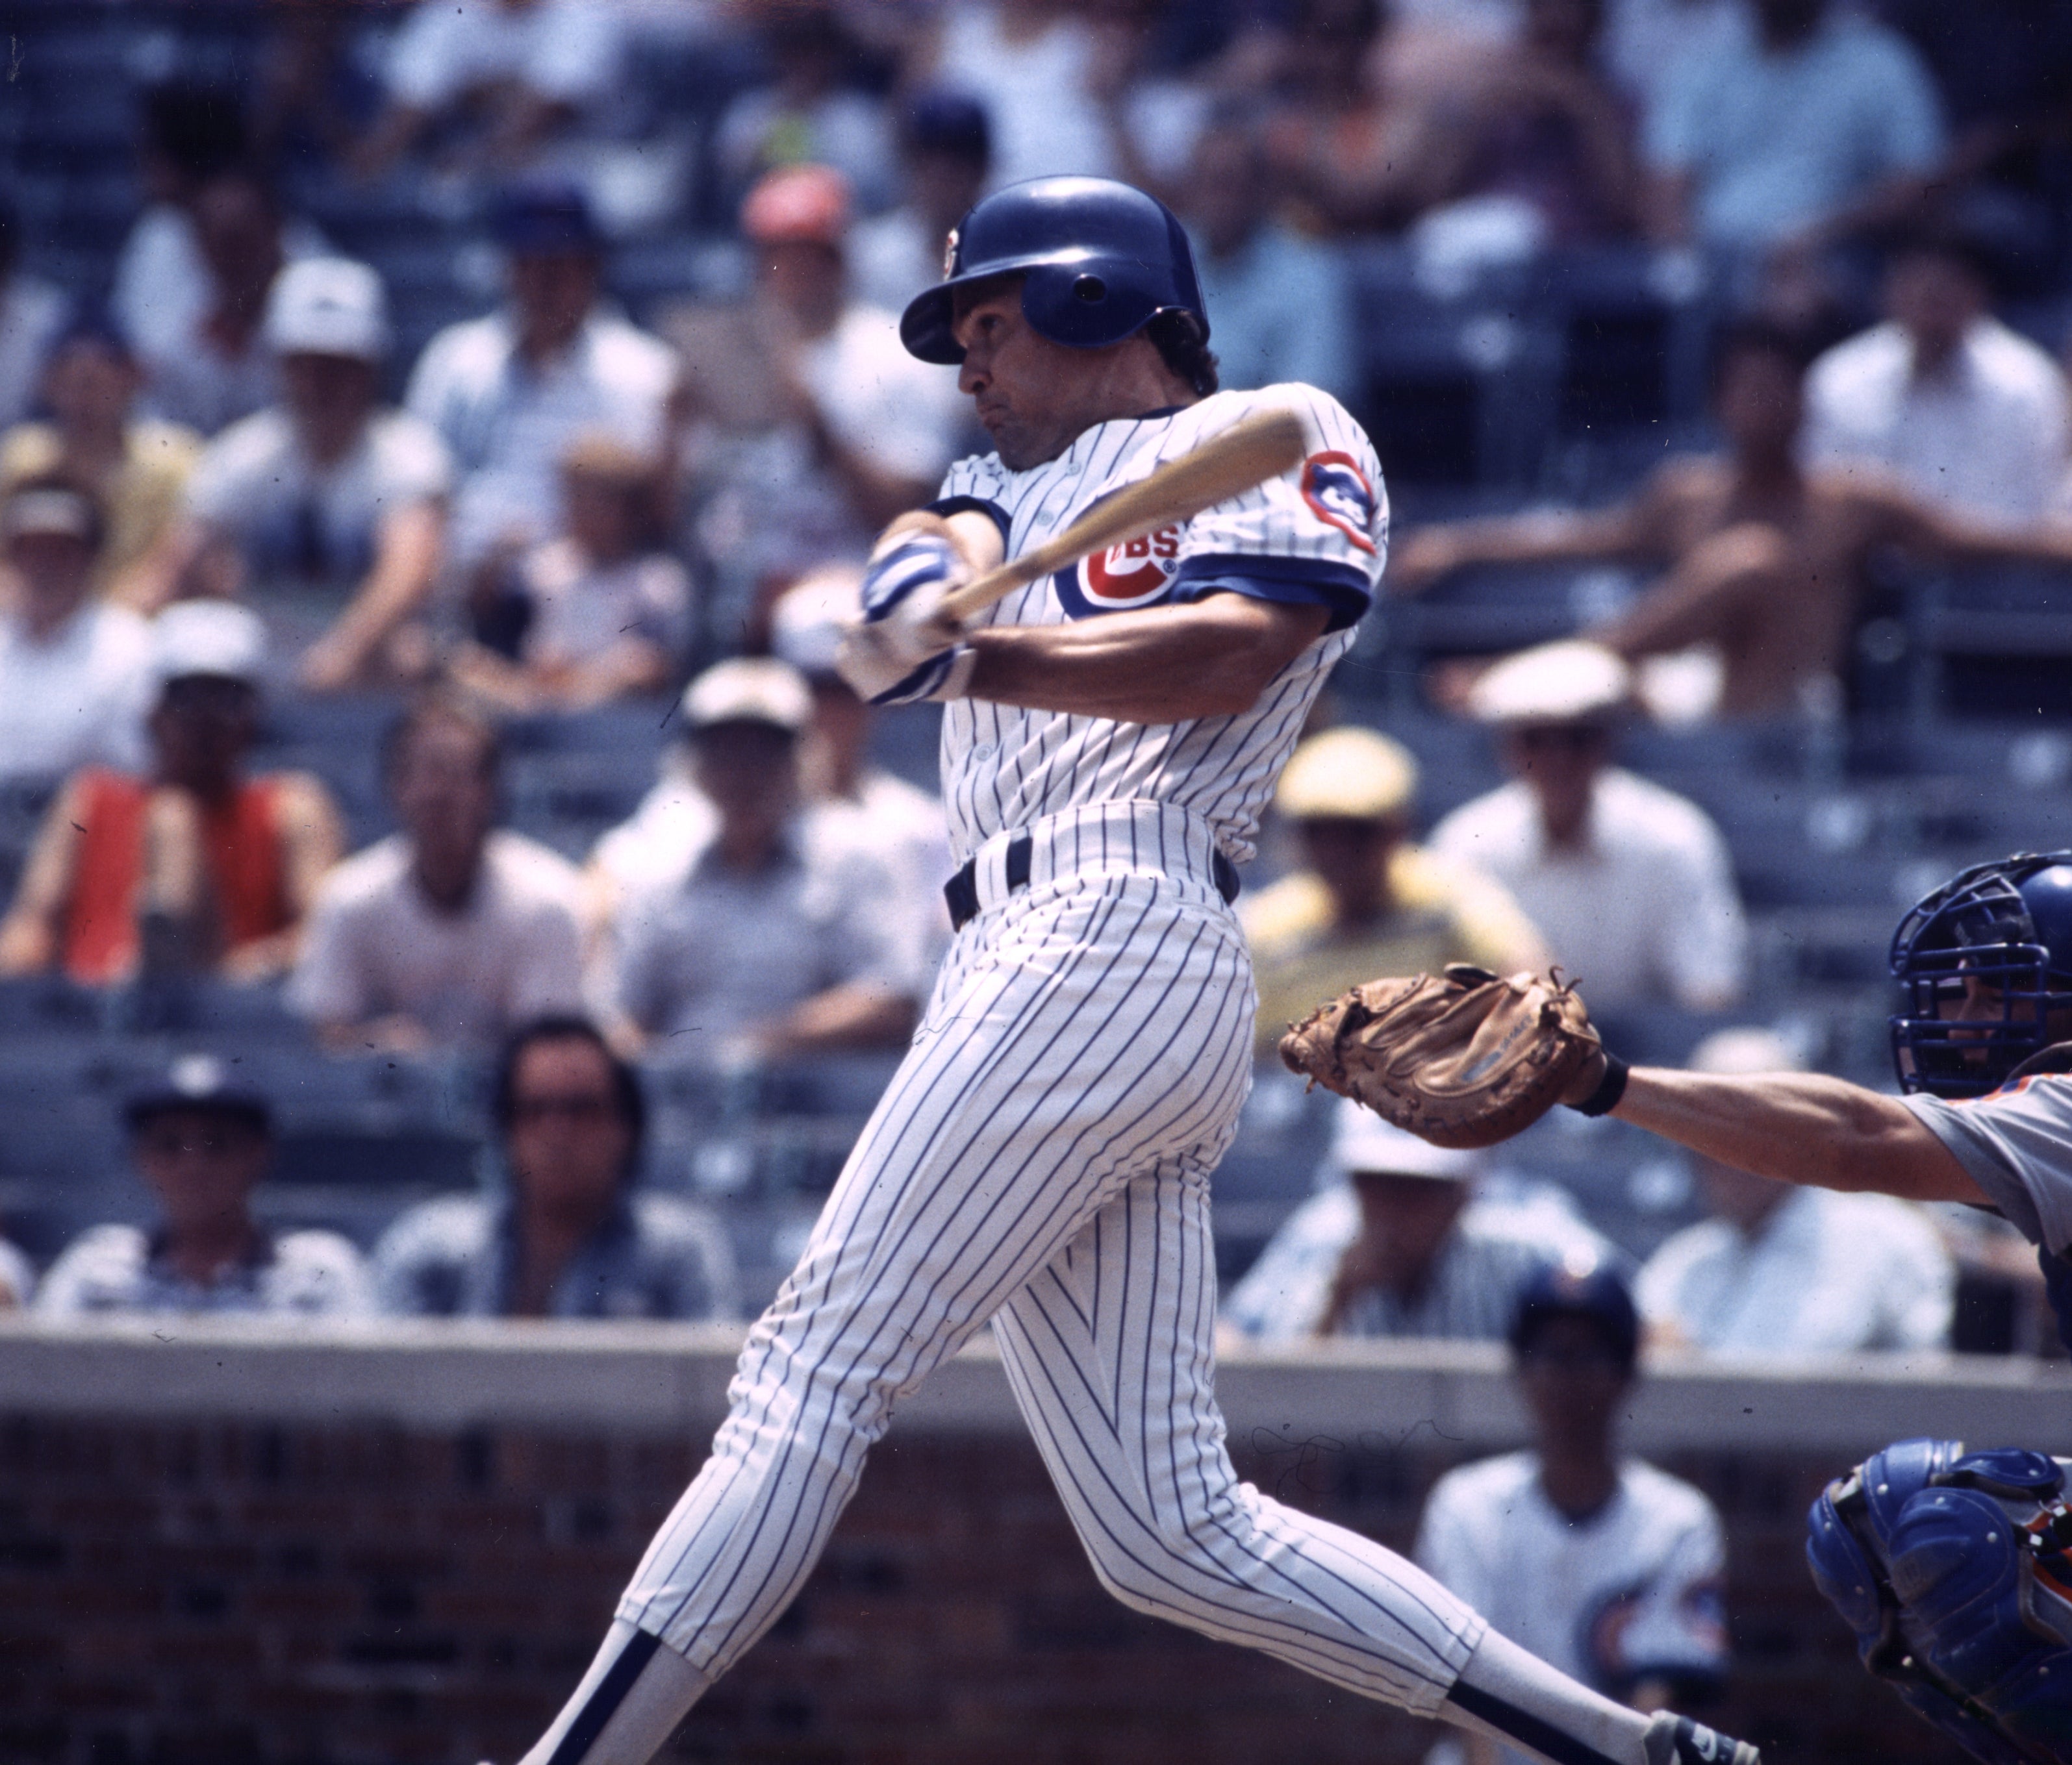 WGN TV - This day in history in 1982, the Chicago Cubs traded Ivan DeJesus  to the Phillies for Larry Bowa and some throw-in named Ryne Sandberg.